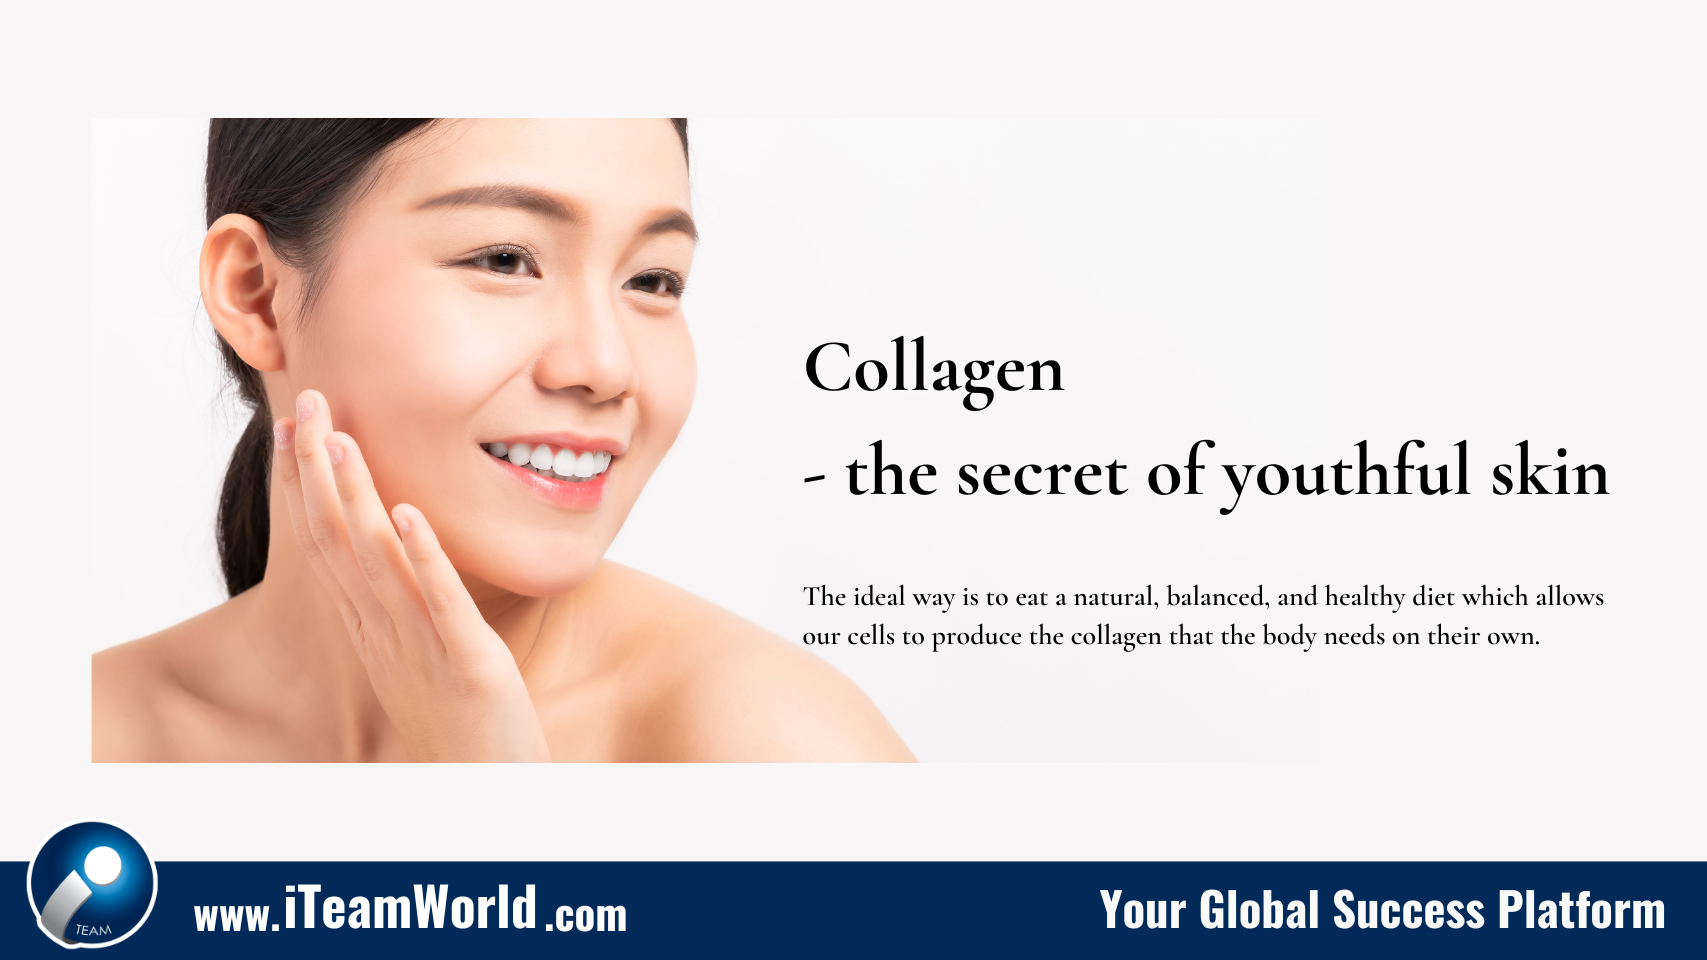 Collagen - the secret of youthful skin